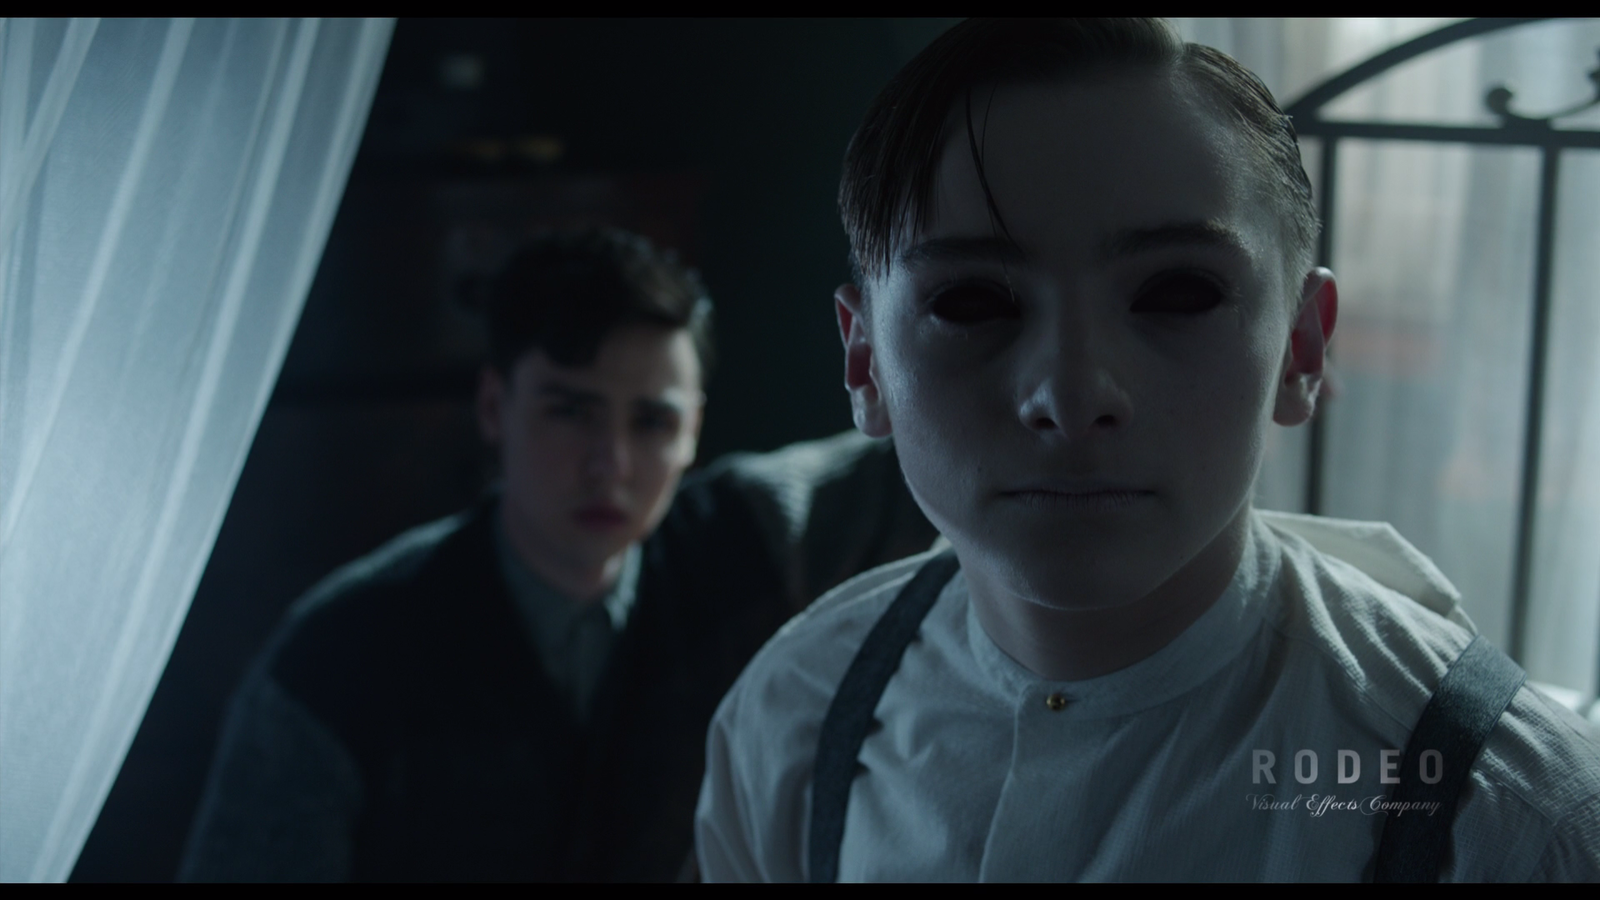 Special effects from Miss Peregrine's Home for Peculiar Children - Movies, House of Peculiar Children, Special effects, Ella Purnell, Asa Butterfield, Samuel L Jackson, Before and after VFX, GIF, Longpost